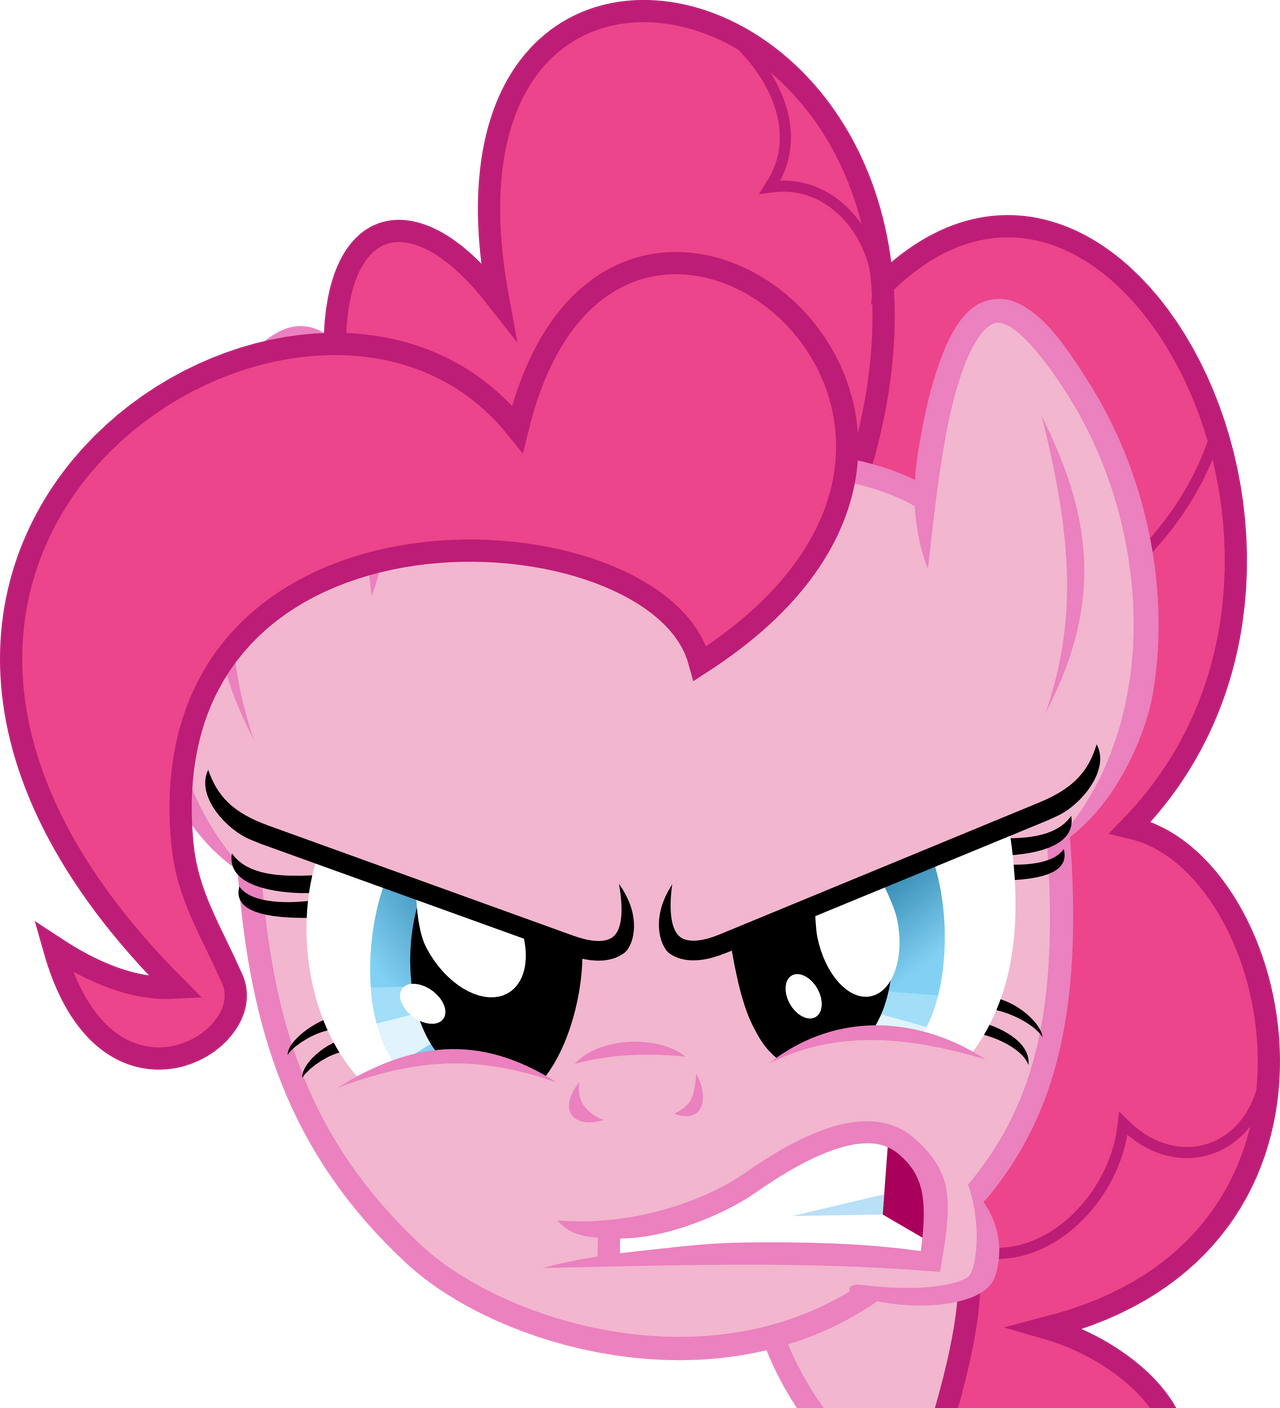 Pinkie Pie Angry by Mio94 on DeviantArt